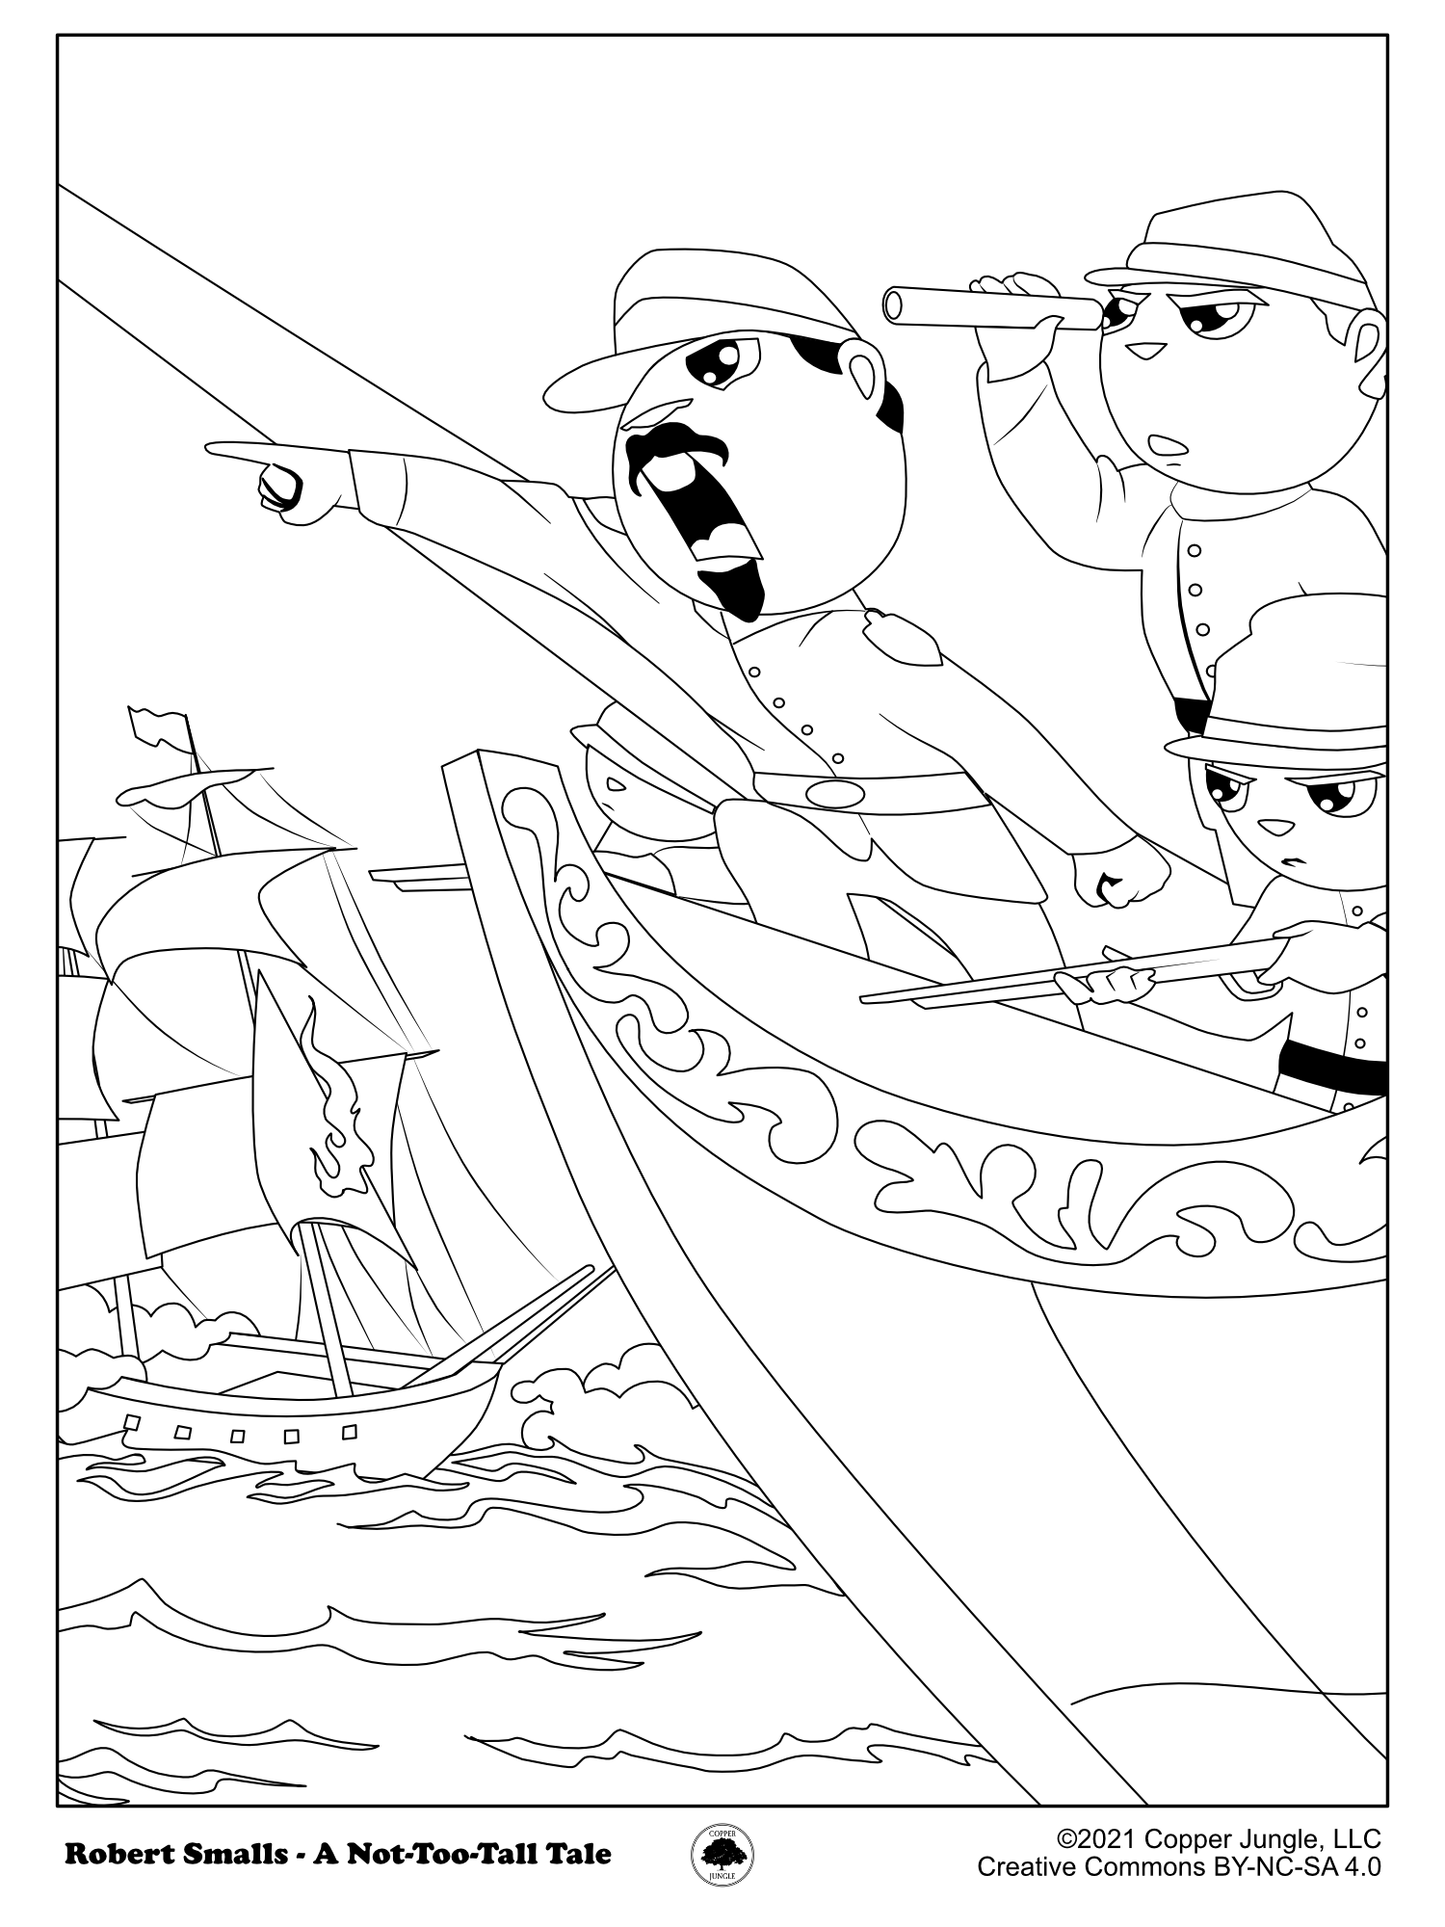 Robert Smalls Naval Battle Coloring Page